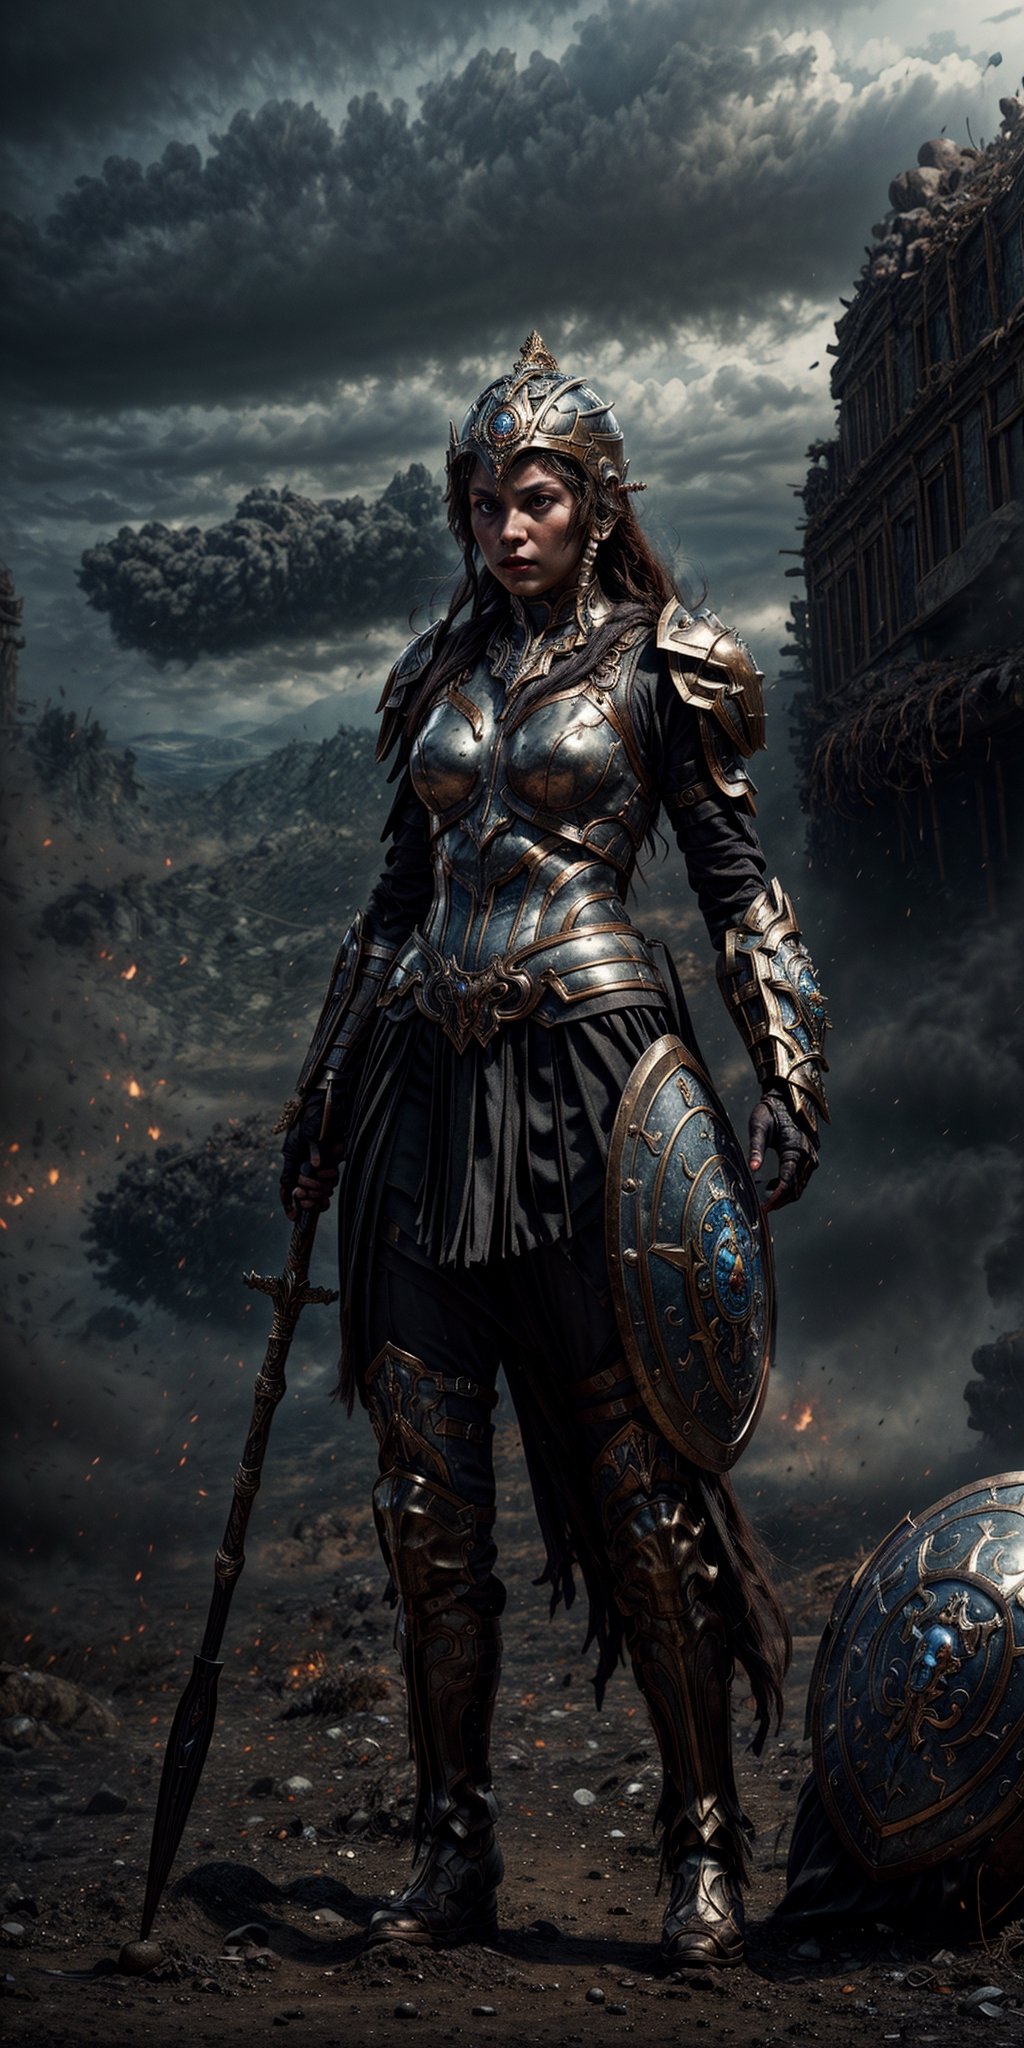 "Create a CG masterpiece with the best quality and stunning detail. It features Athena, the goddess of wisdom, holding a shield in her left hand, a spear in her right hand, adorned with a helmet and armor. She's in an attacking pose, standing amidst a dusty battlefield with a dark background. Please generate an 8K resolution wallpaper that captures this epic scene." (Perfect face), photographic cinematic super super high detailed super realistic image, 4k ultra HDR quality image, (masterpiece 1.2)